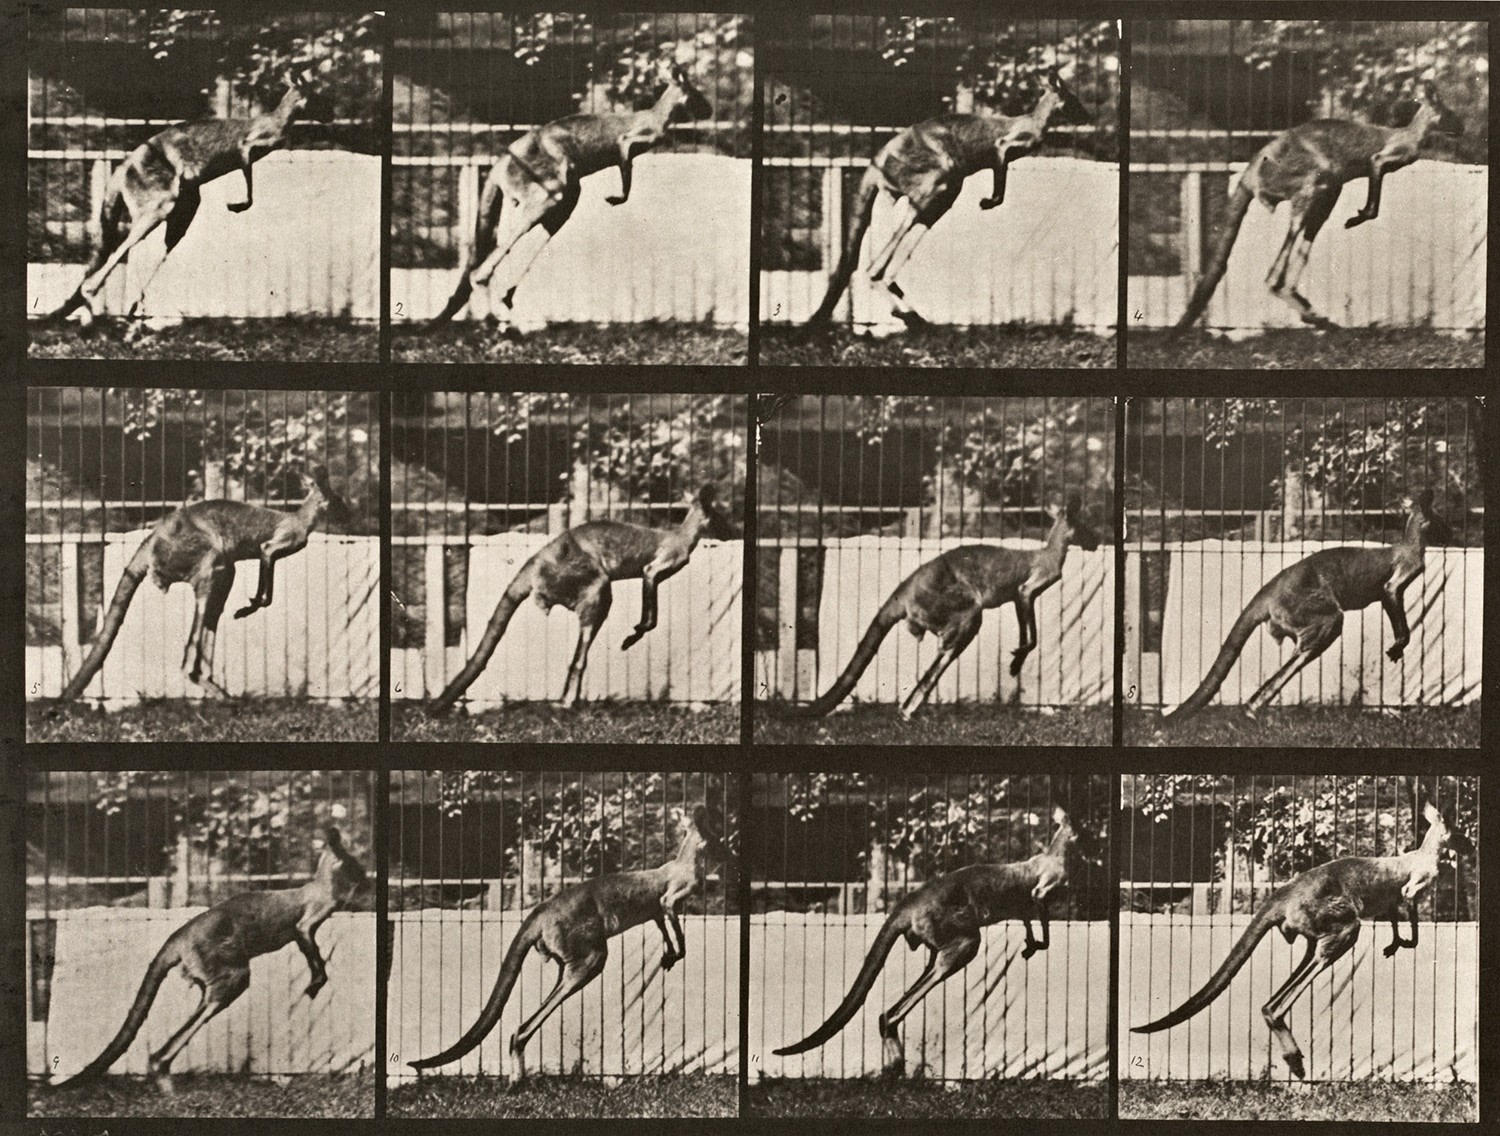 Sequence of black and white photos showing the movements of a kangaroo jumping